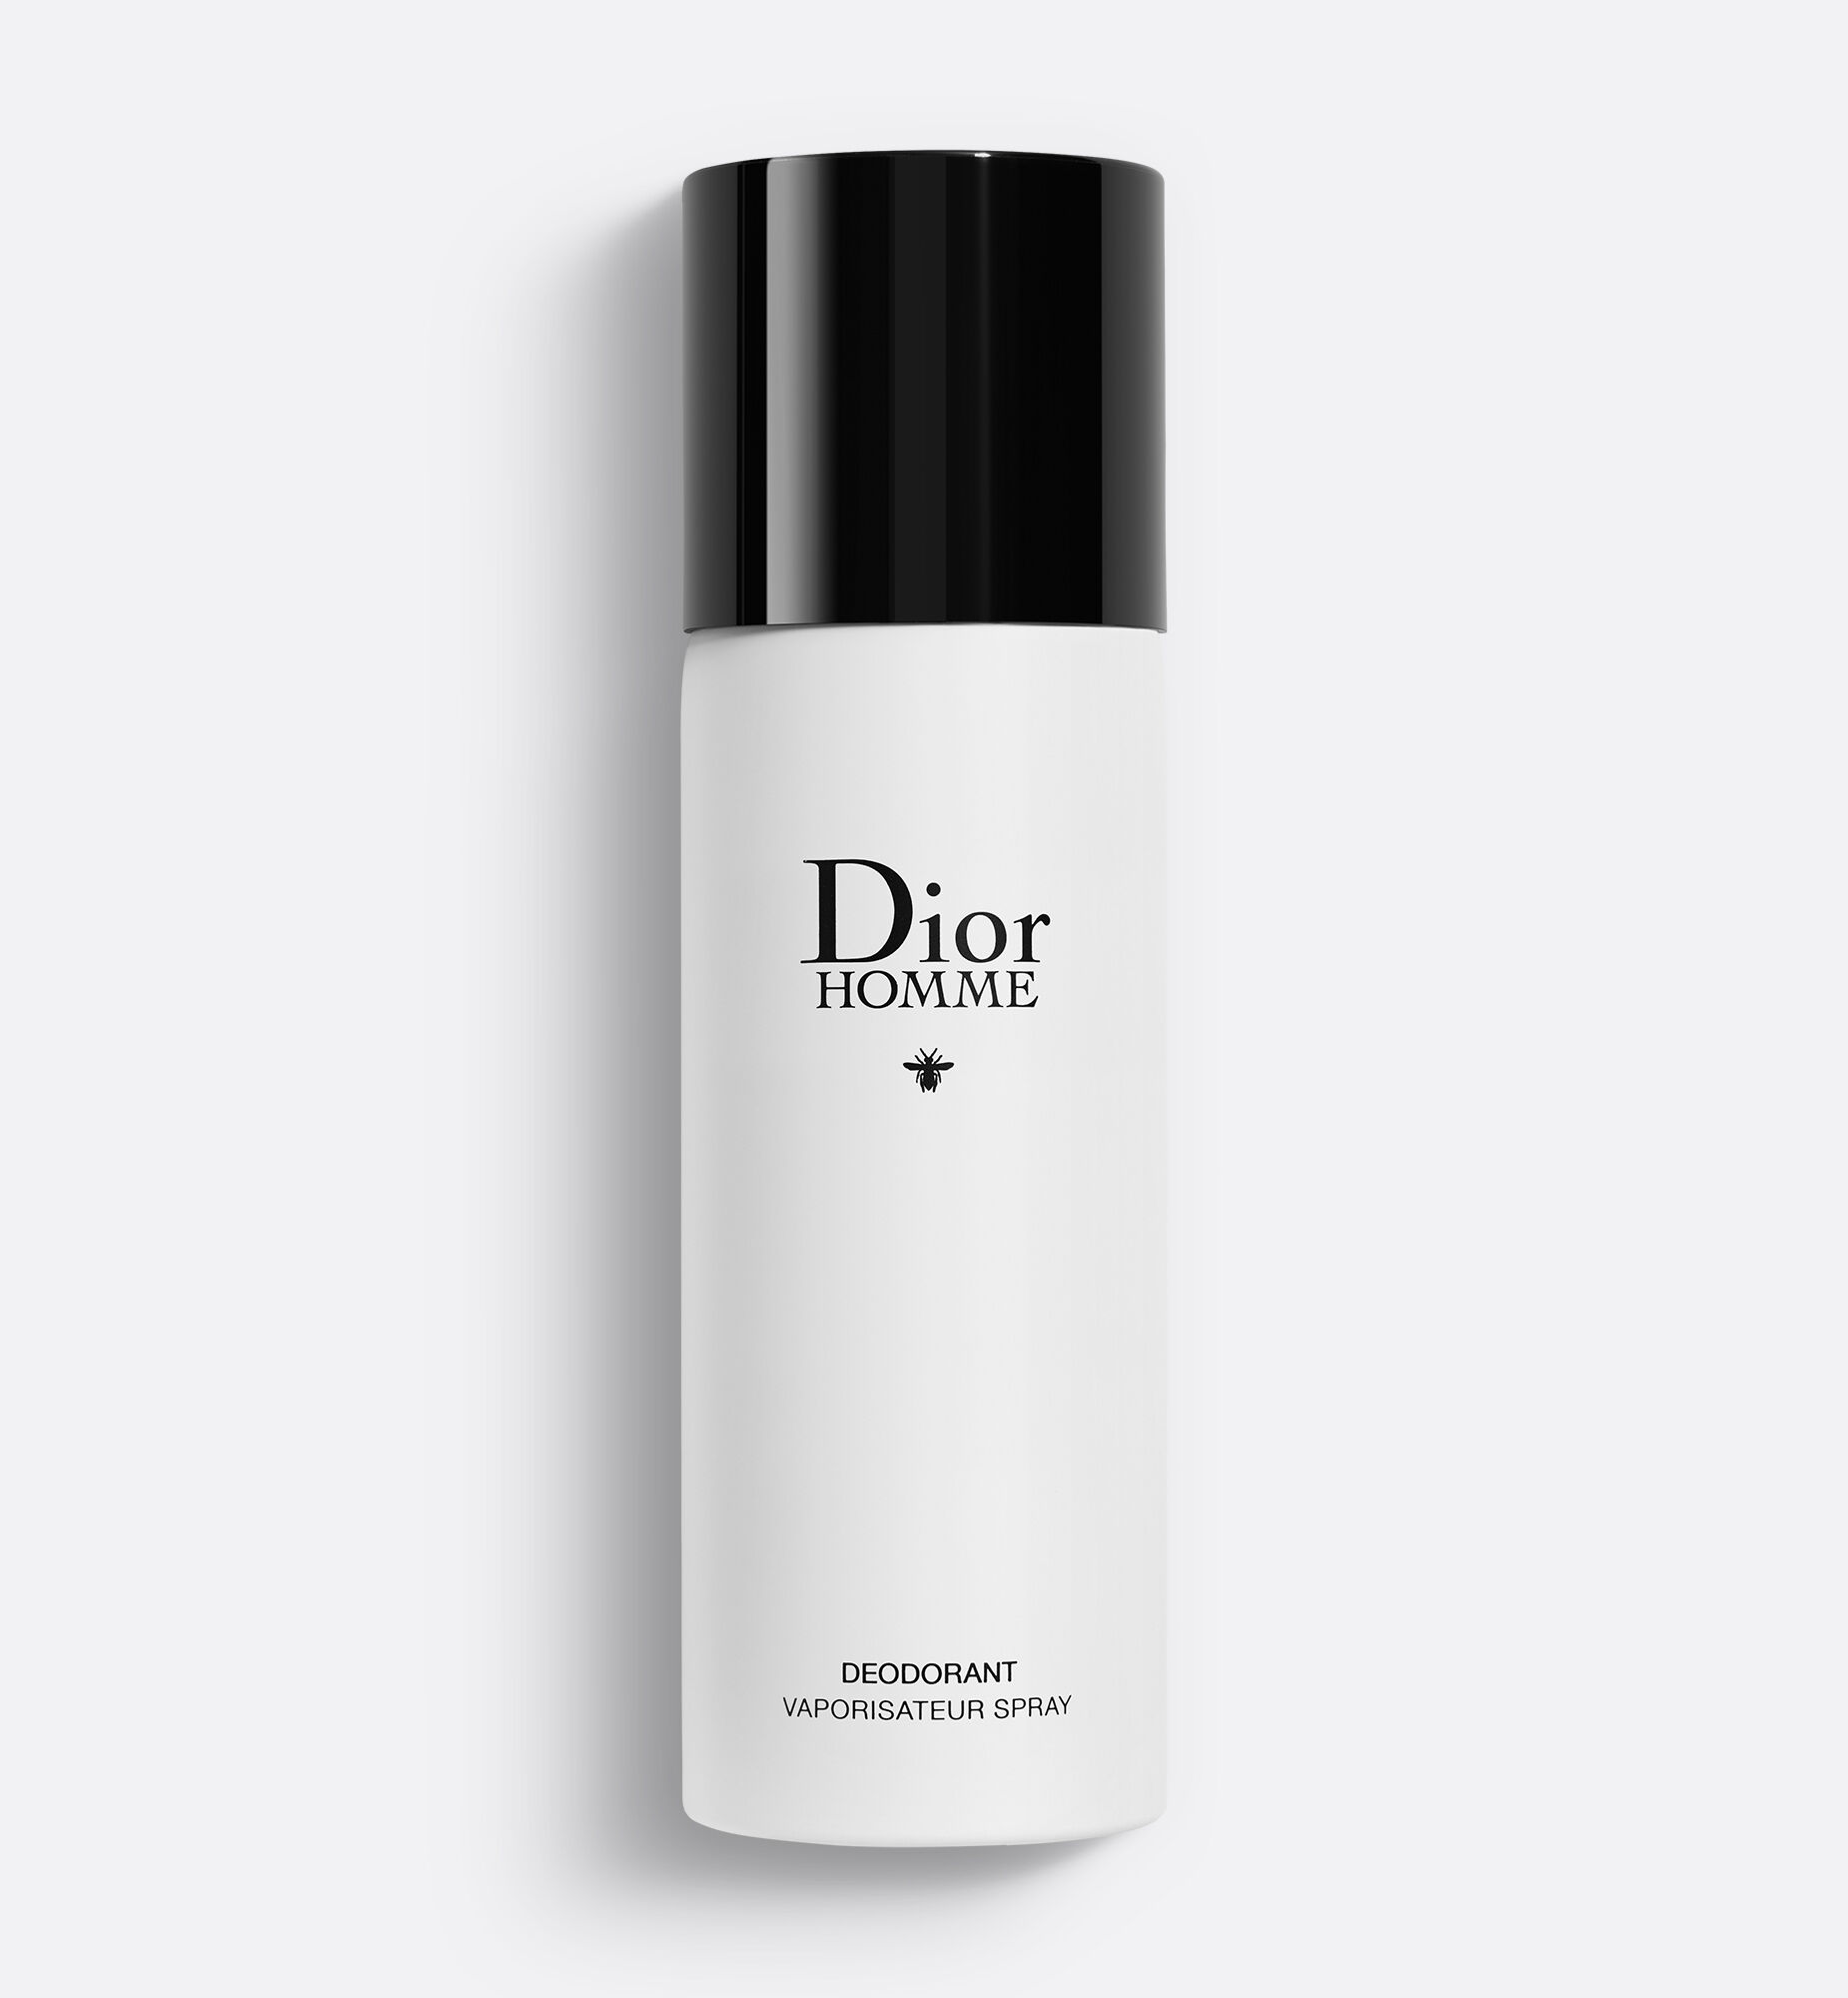 Amazoncom Christian Dior Homme Deodorant Stick for Men 26 Fluid Ounce   Beauty  Personal Care